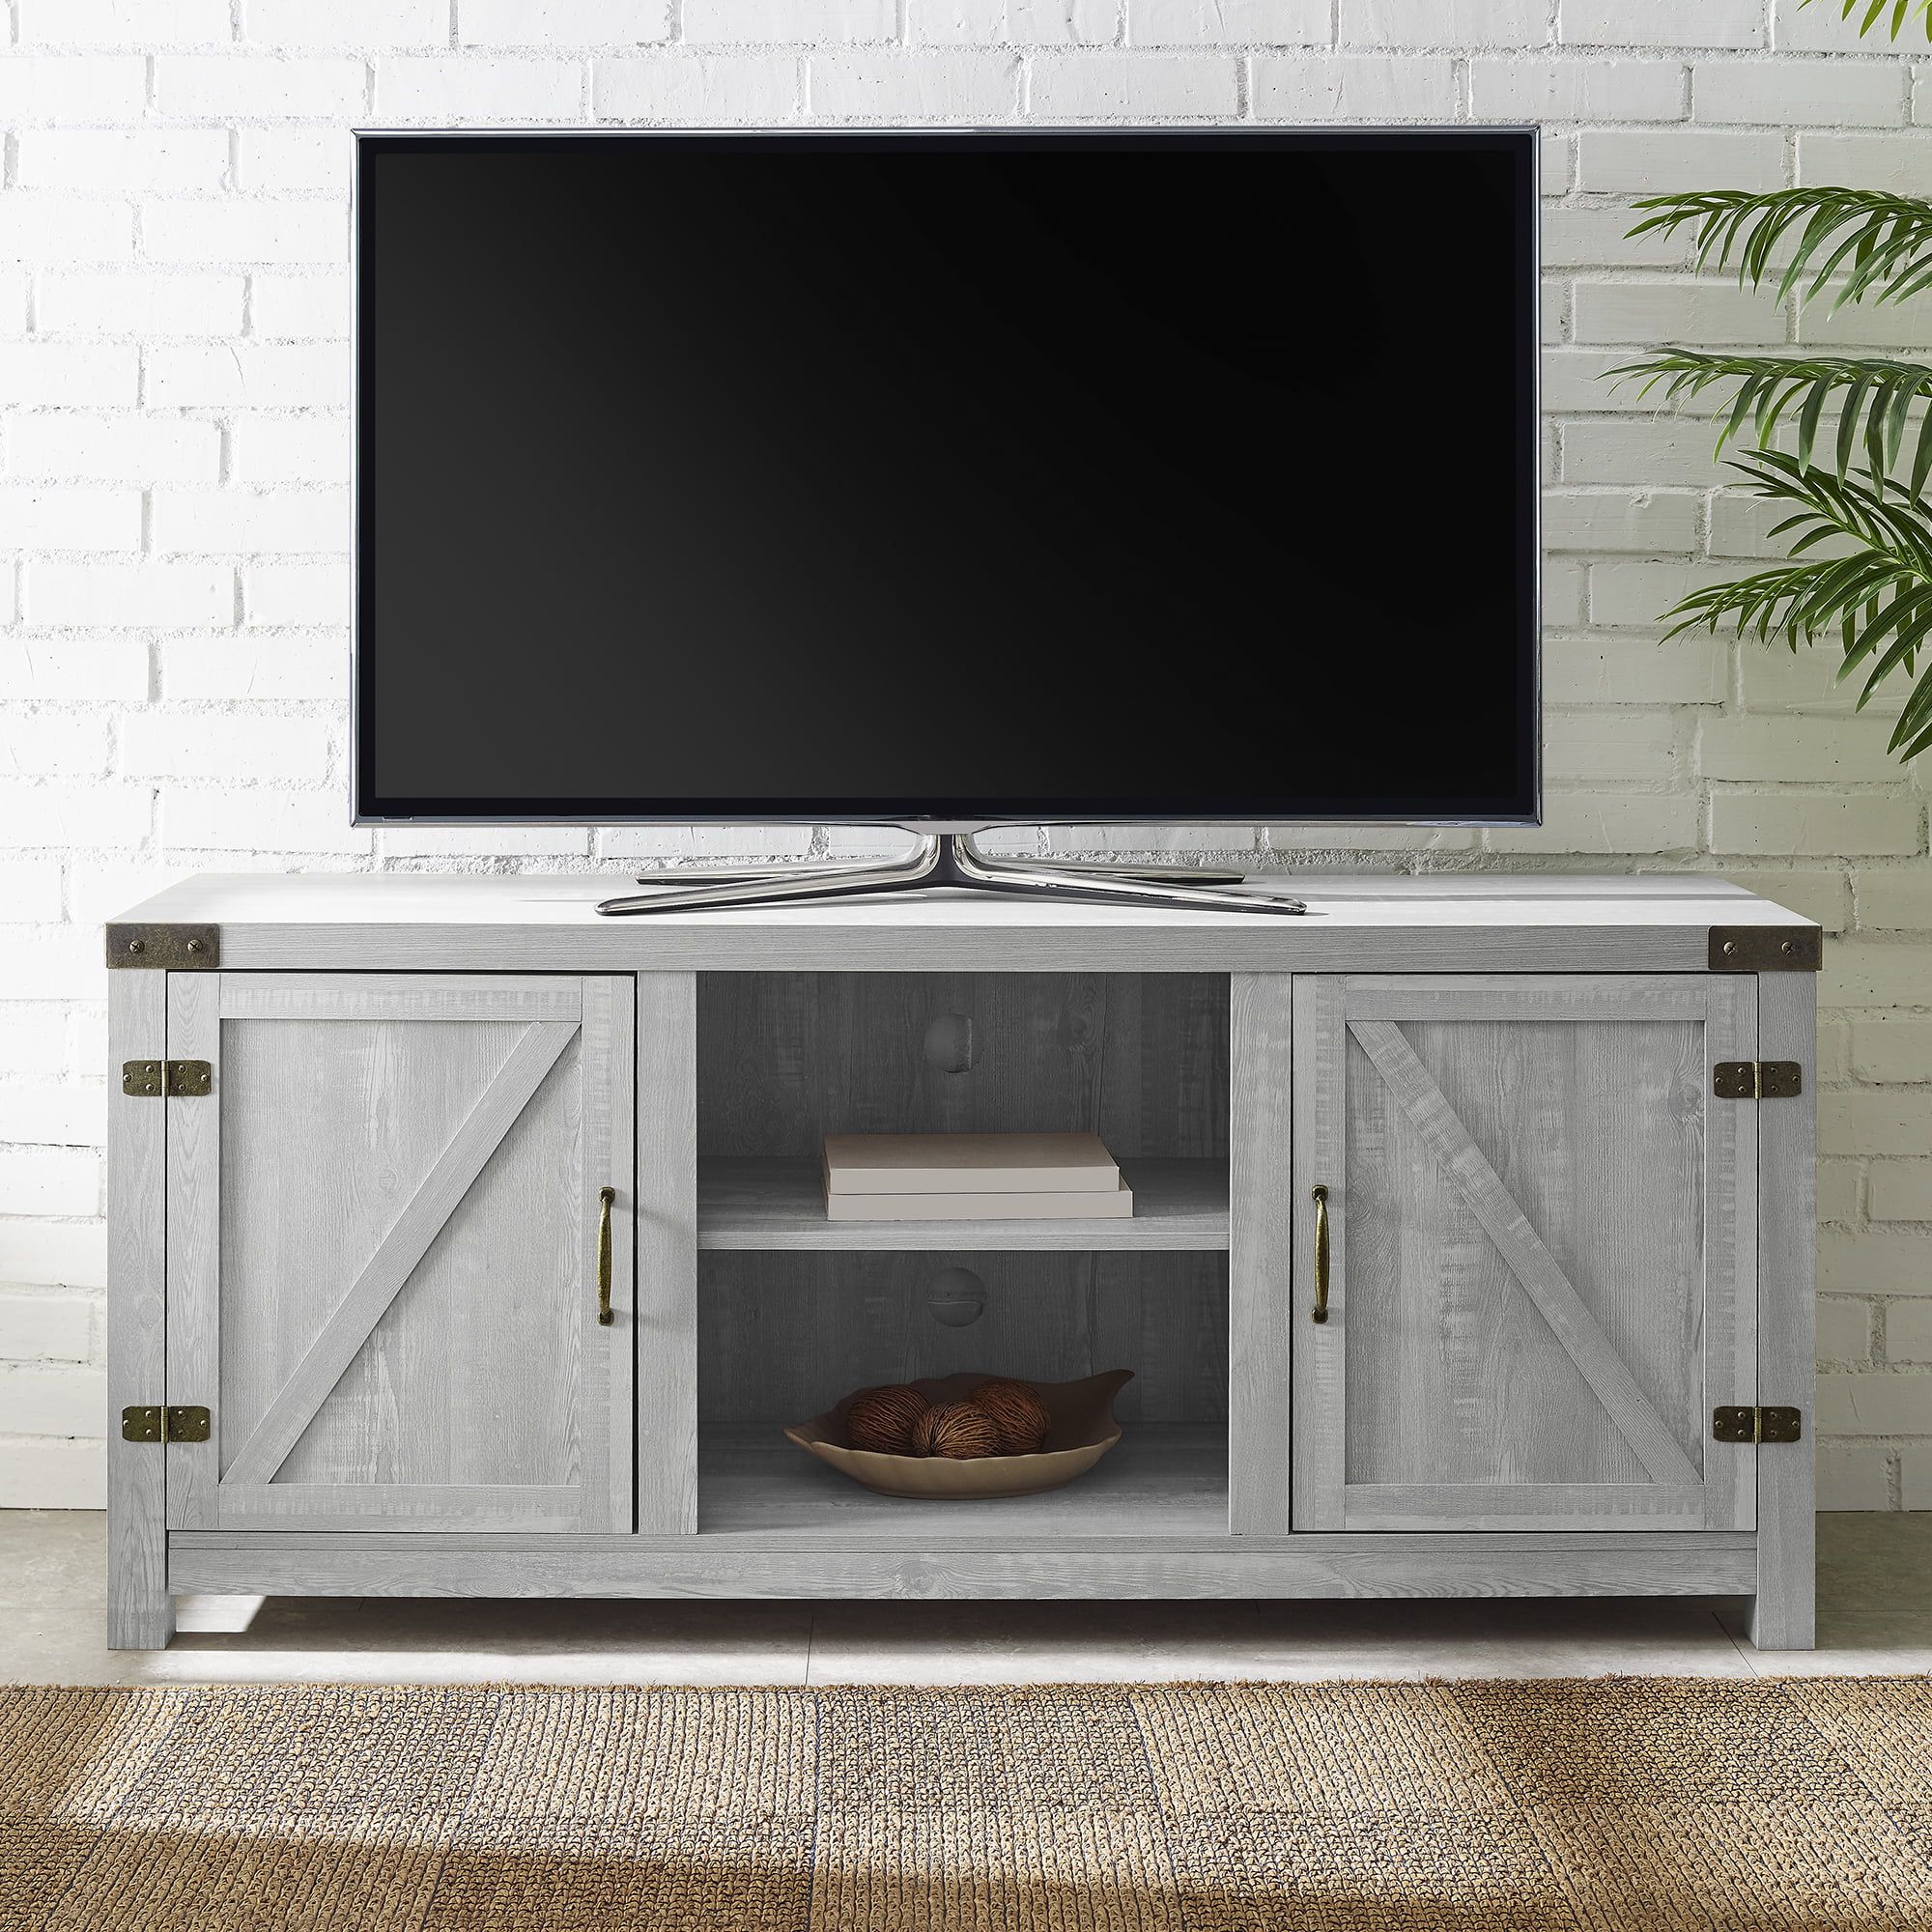 Most Popular Farmhouse Stands For Tvs Throughout Woven Paths Modern Farmhouse Barn Door Tv Stand For Tvs Up To  (View 14 of 15)